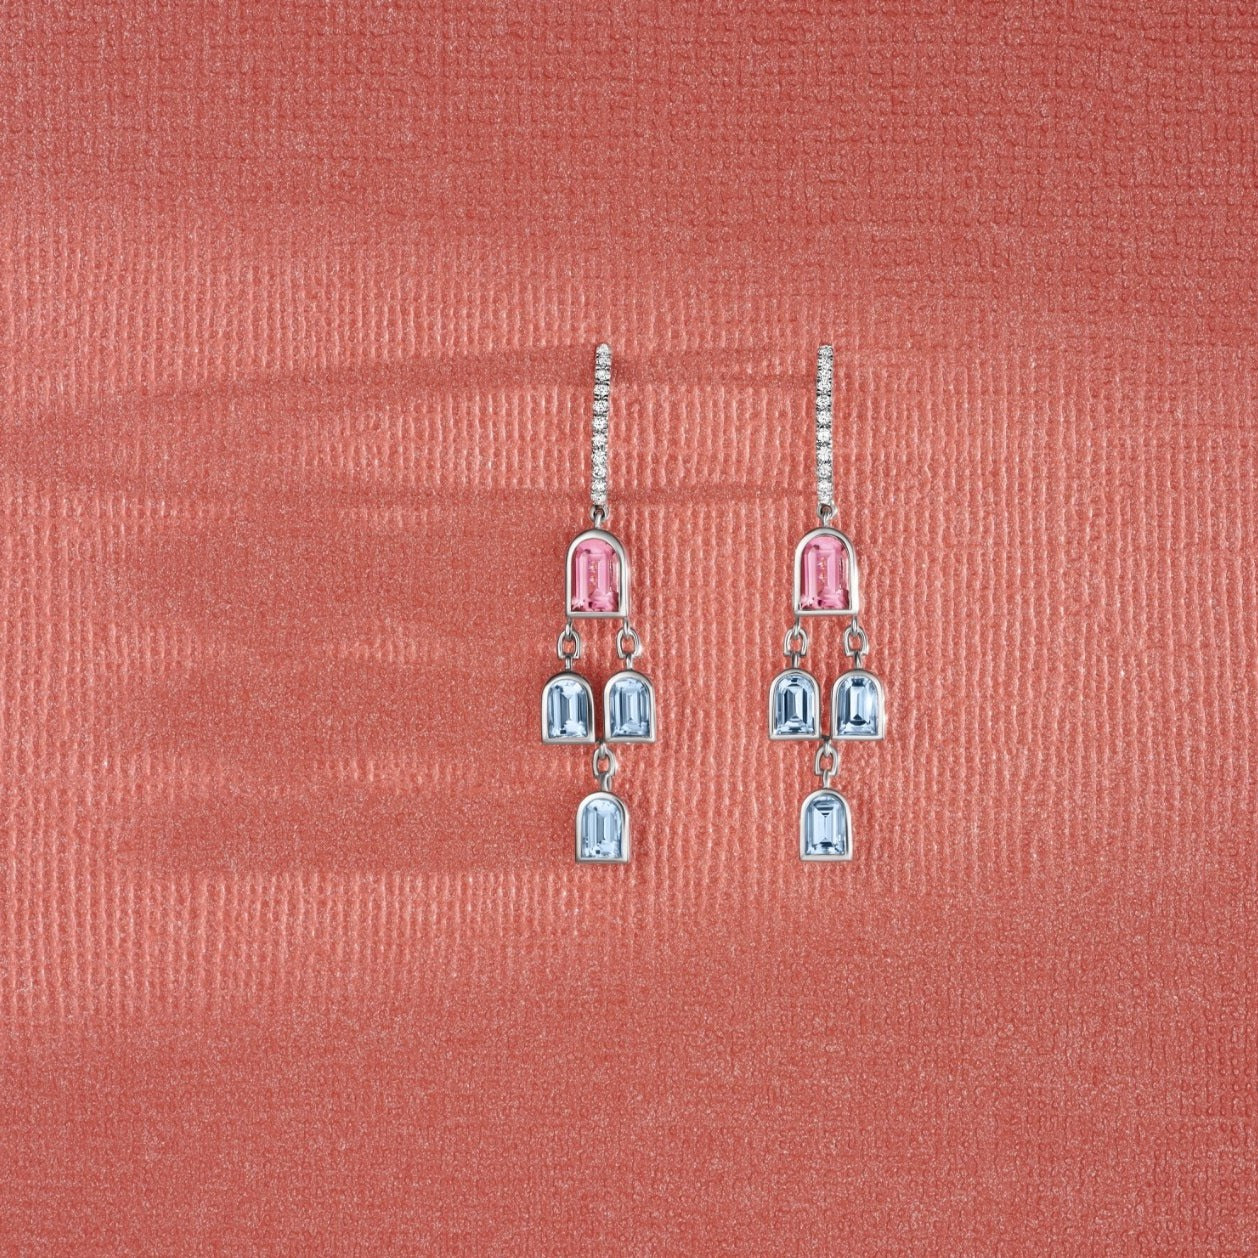 Mosaïque Arch Earrings, 18k White Gold with DAVIDOR Arch Cut Pink Tourmalines and Aquamarines - DAVIDOR